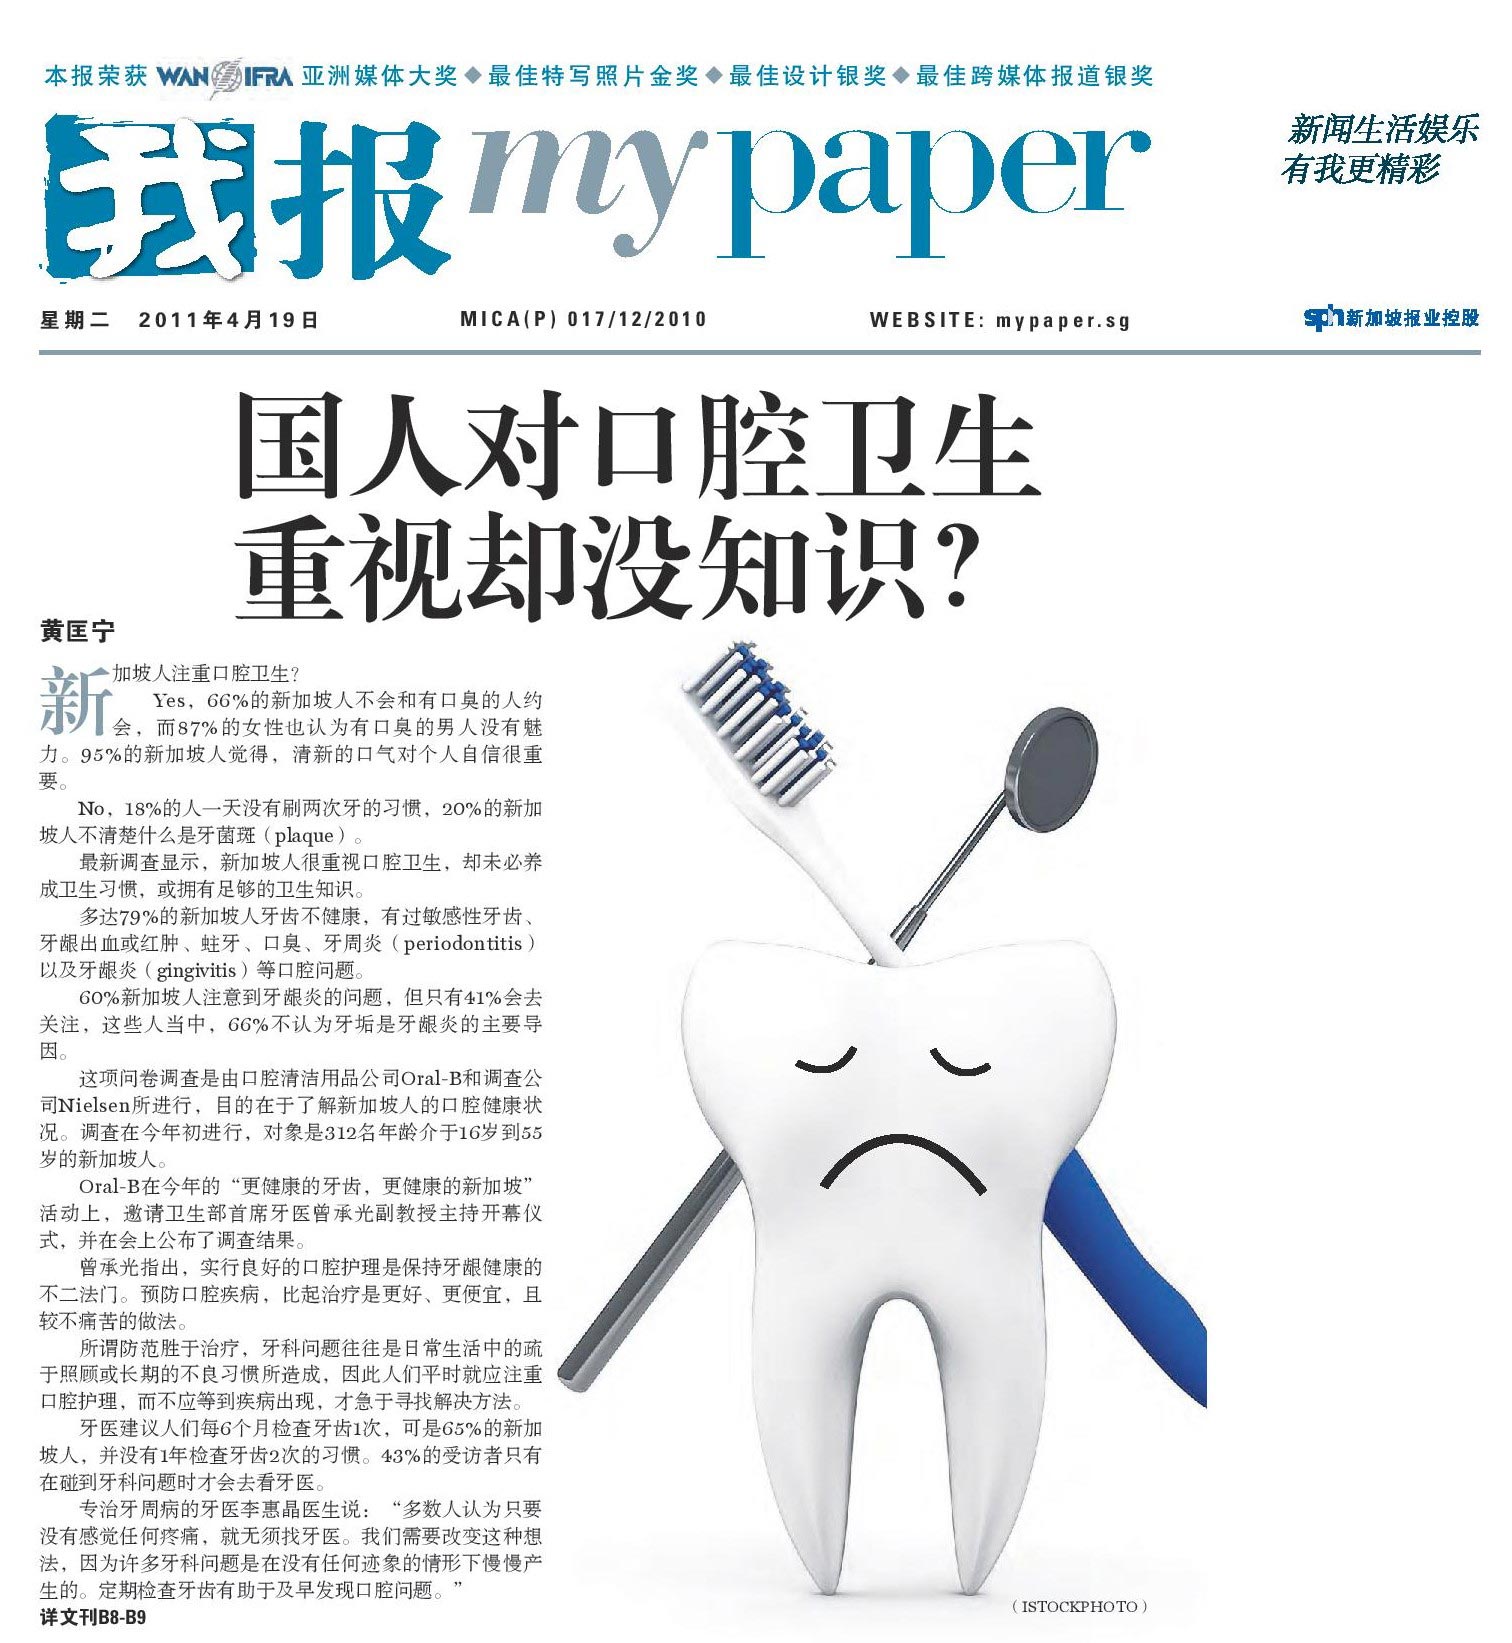 My Paper Newspaper, April 19, 2011: “Singaporeans know the importance of Oral Health yet lack knowledge about it?” (zh)